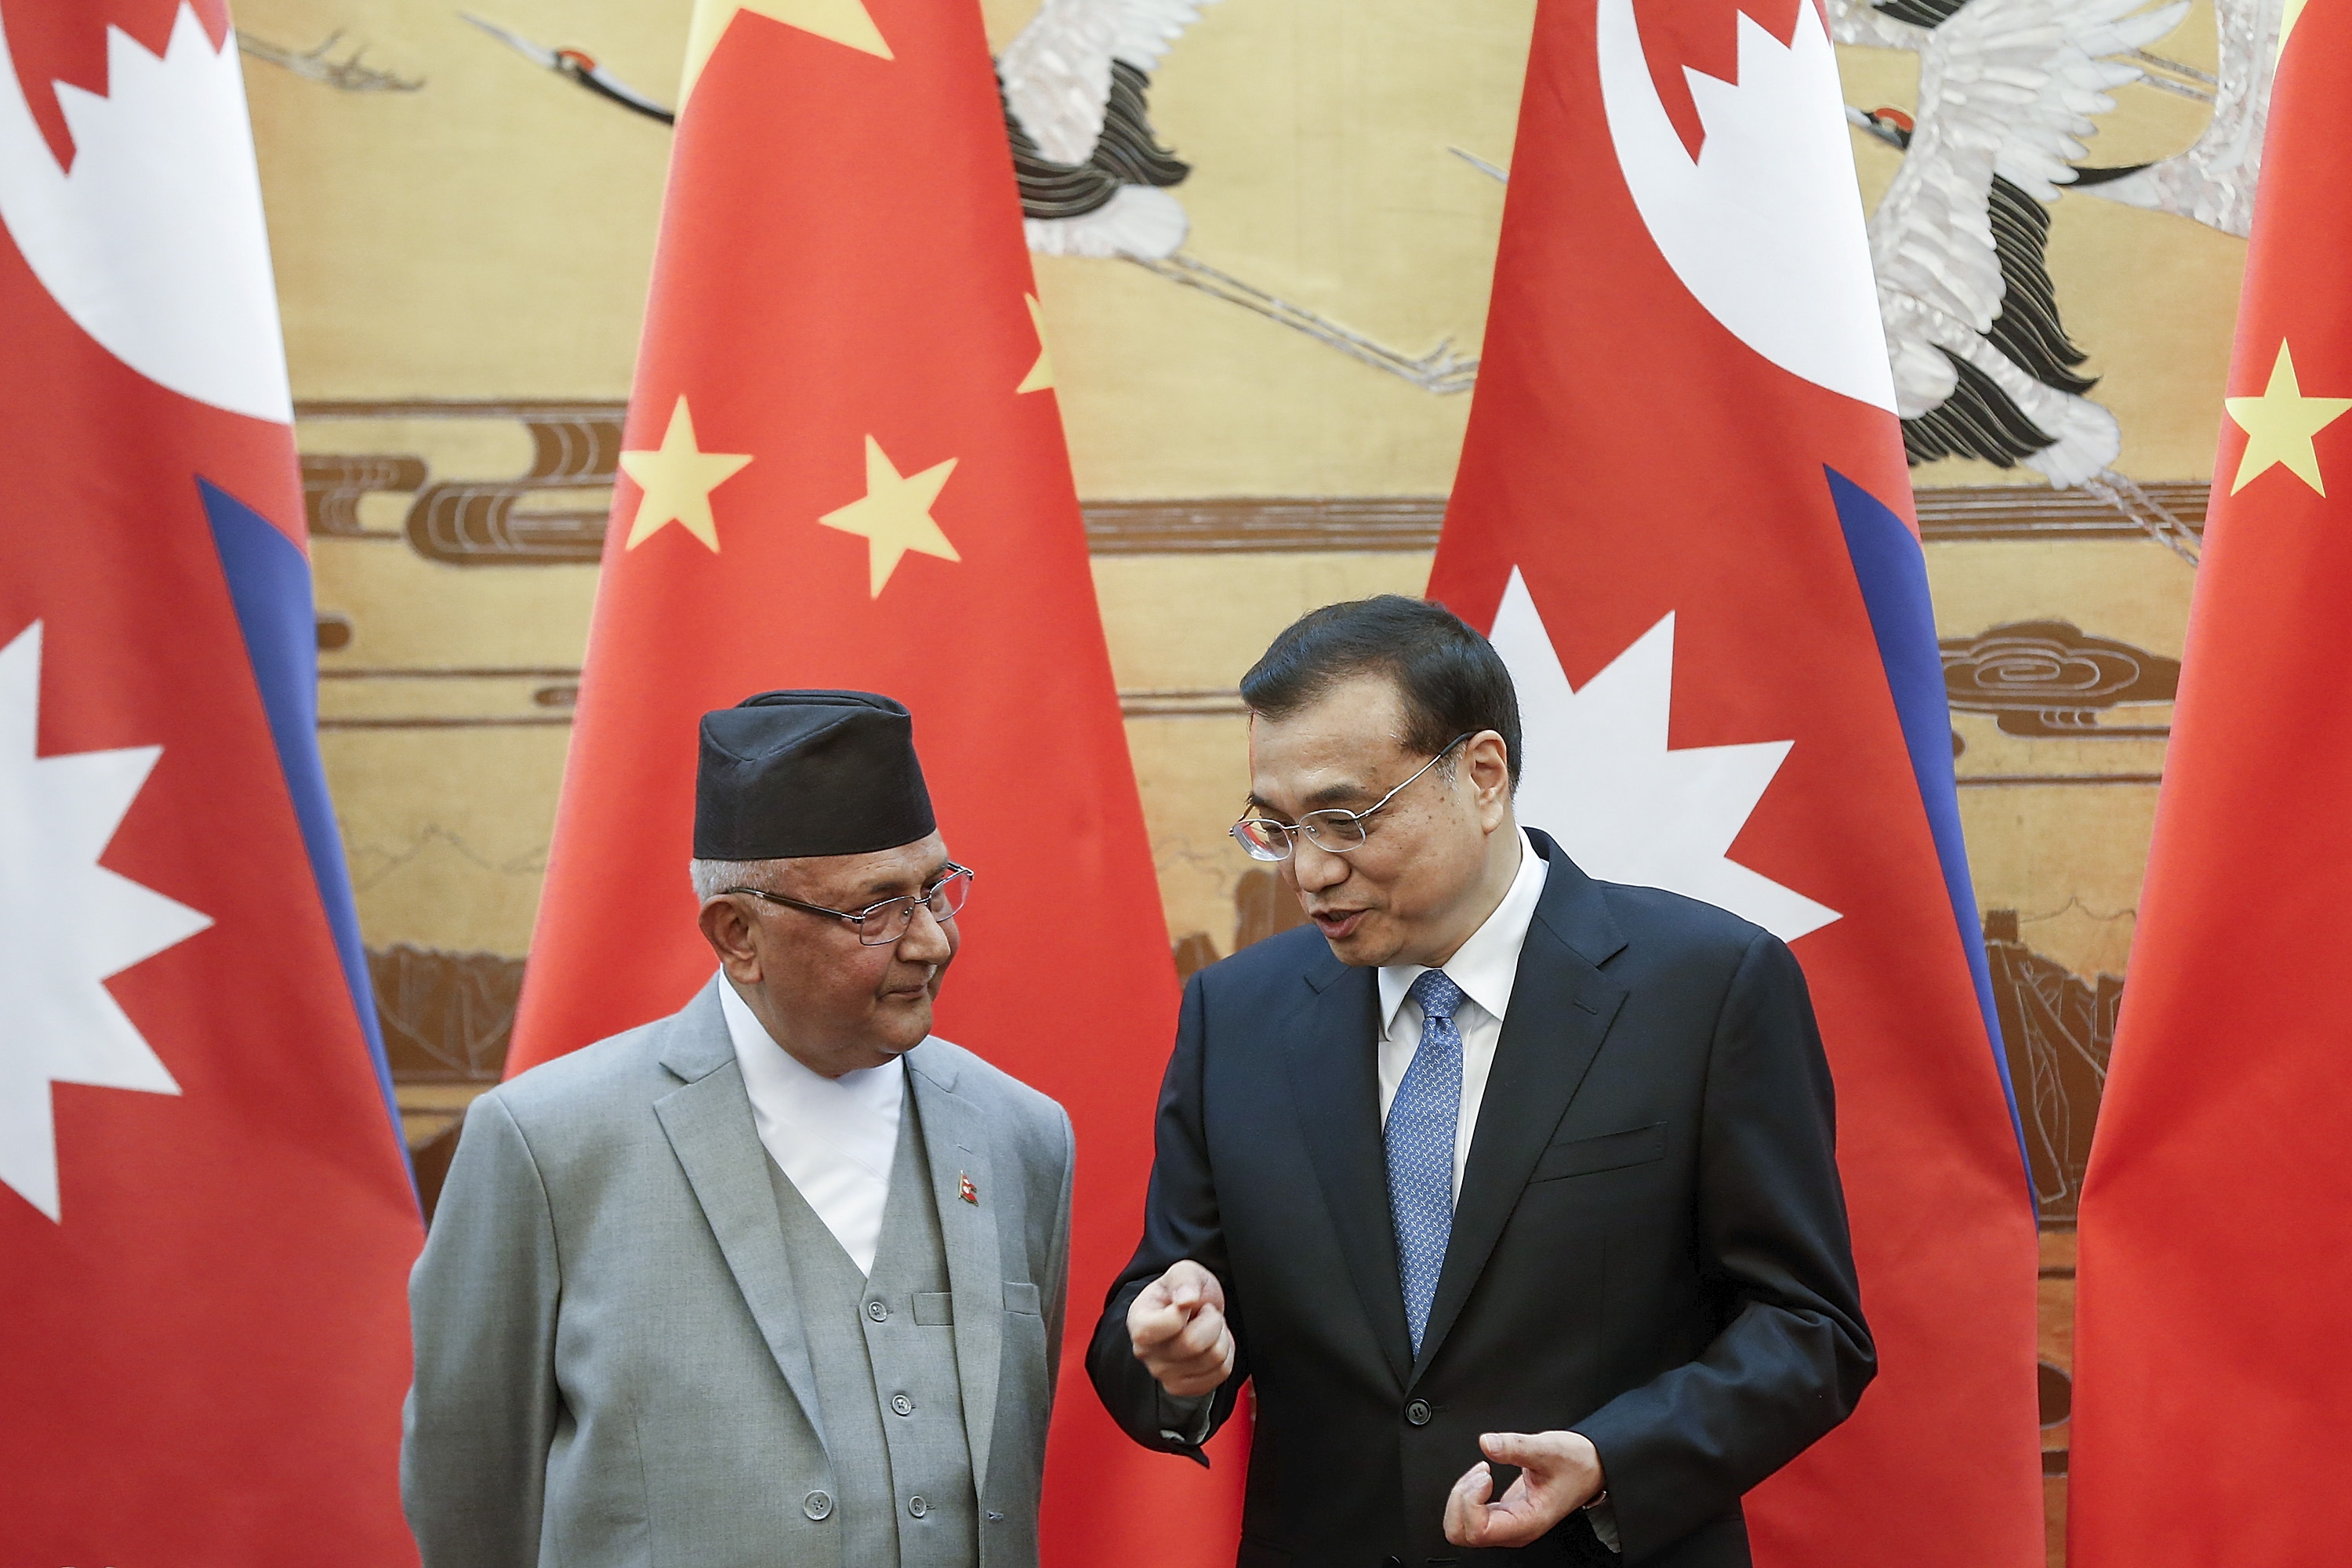 China's Premier Li Keqiang, right, talks to Nepal's Prime Minister K.P. Sharma Oli during a signing ceremony at the Great Hall of the People in Beijing on March 21, 2016 (Lintao Zhang—Pool/Reuters)